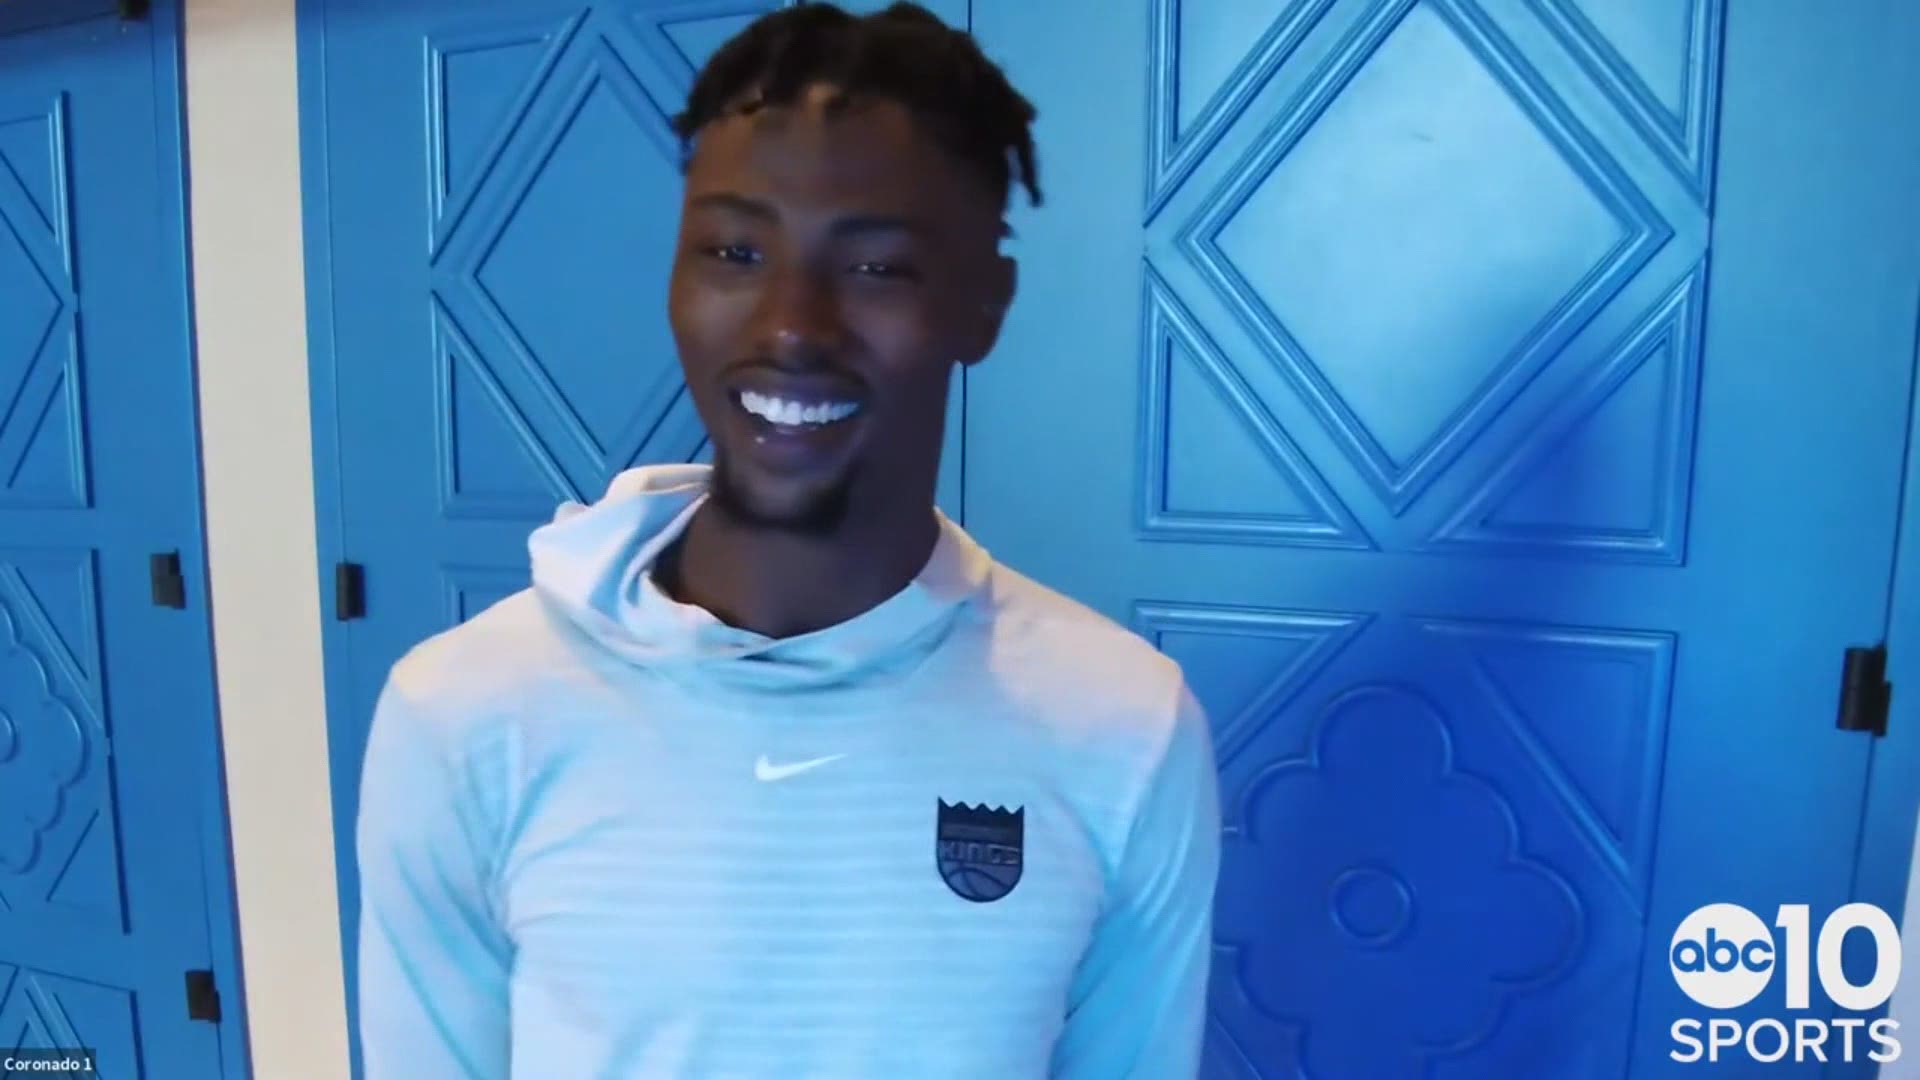 Sacramento Kings C Harry Giles on what he chose for his social justice message for his NBA jersey and adjusting to the bubble environment in Orlando.